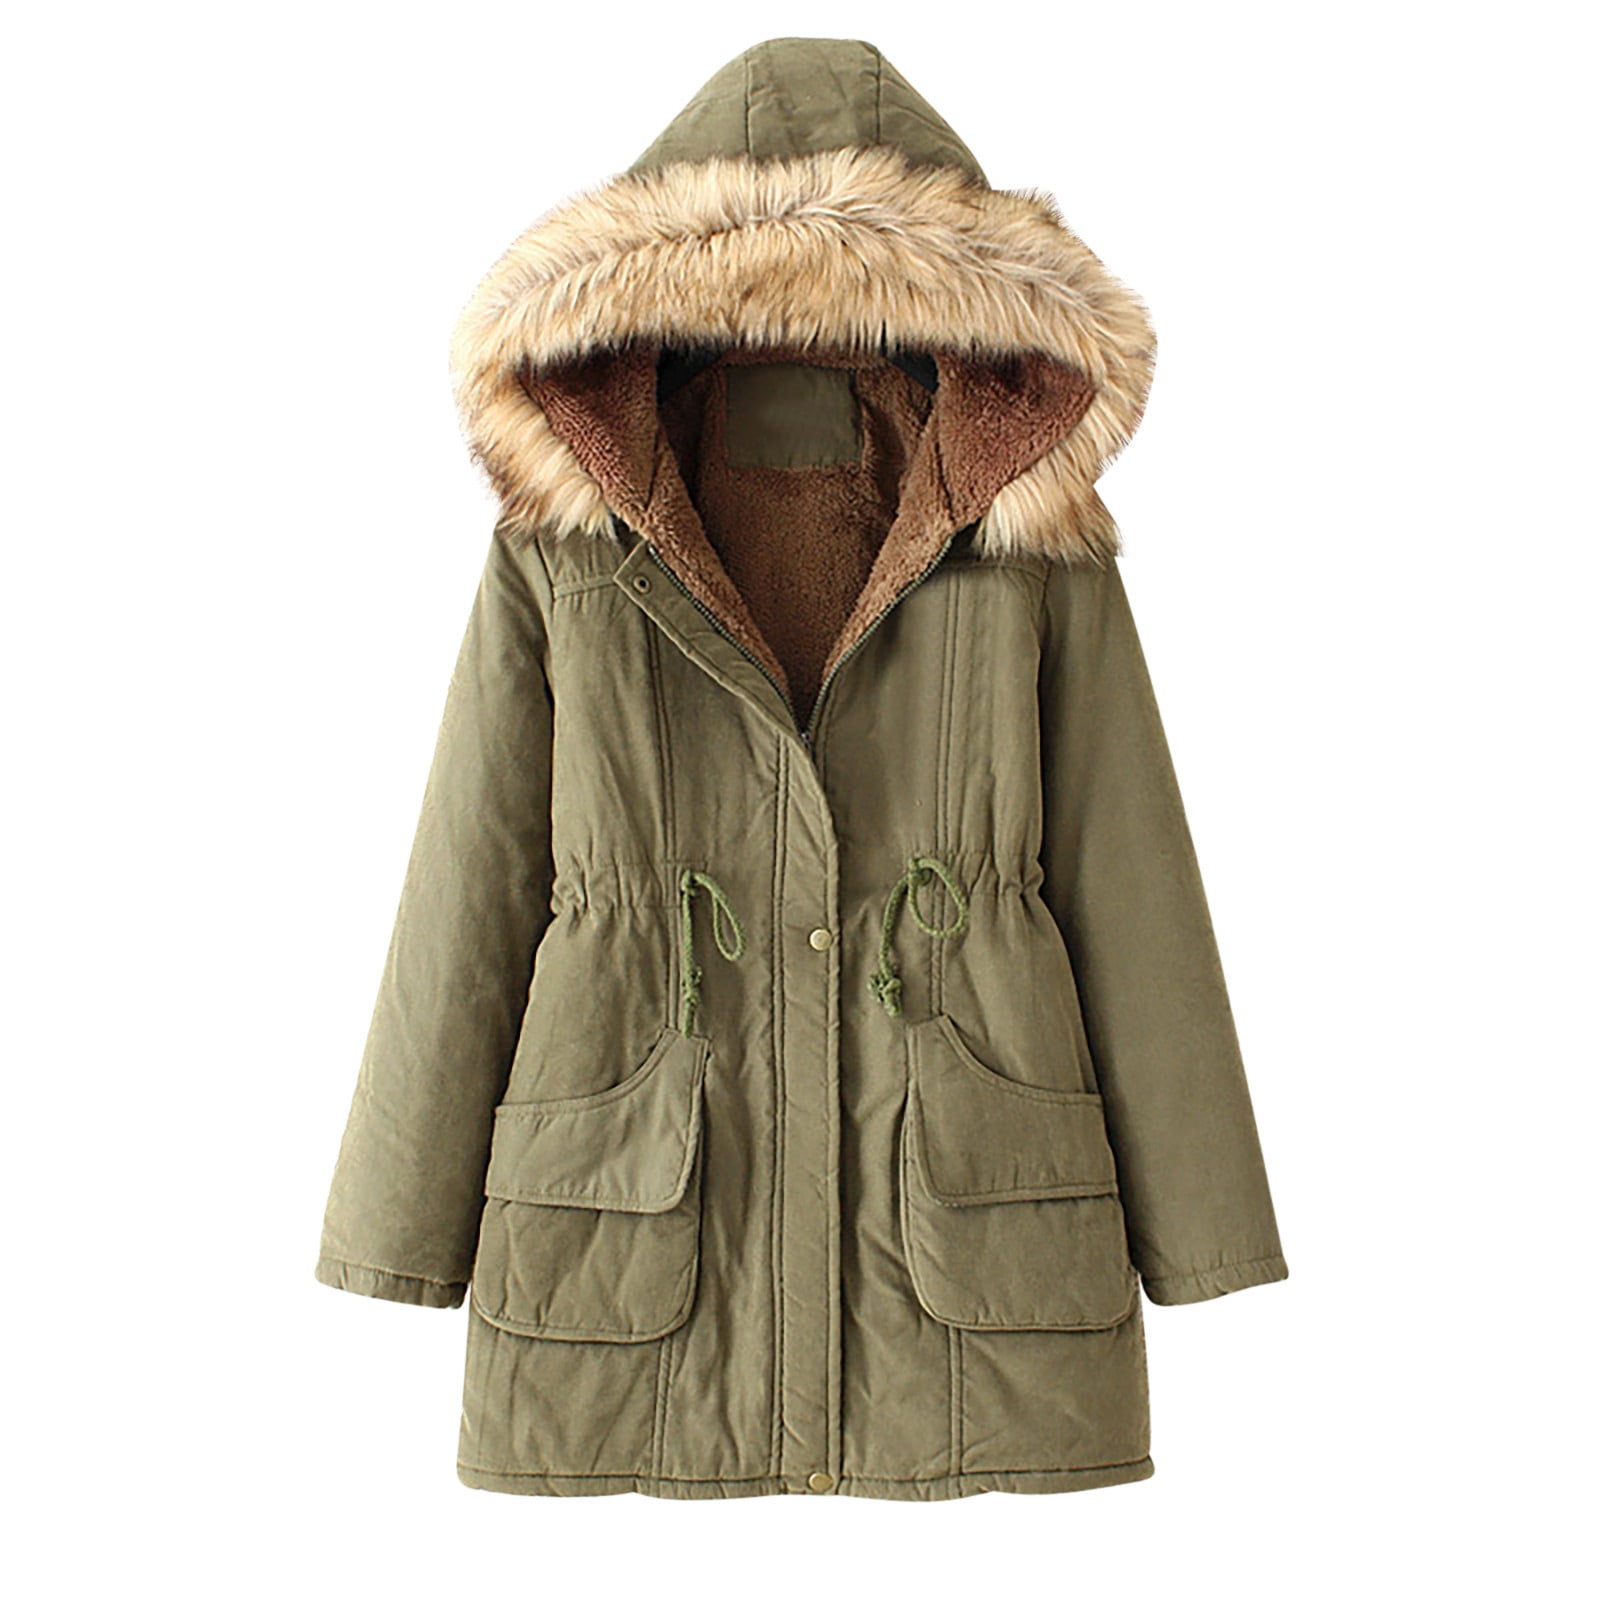 Winter Coats for Women Warm Cotton Plush Sherpa Lined Hooded Parka ...